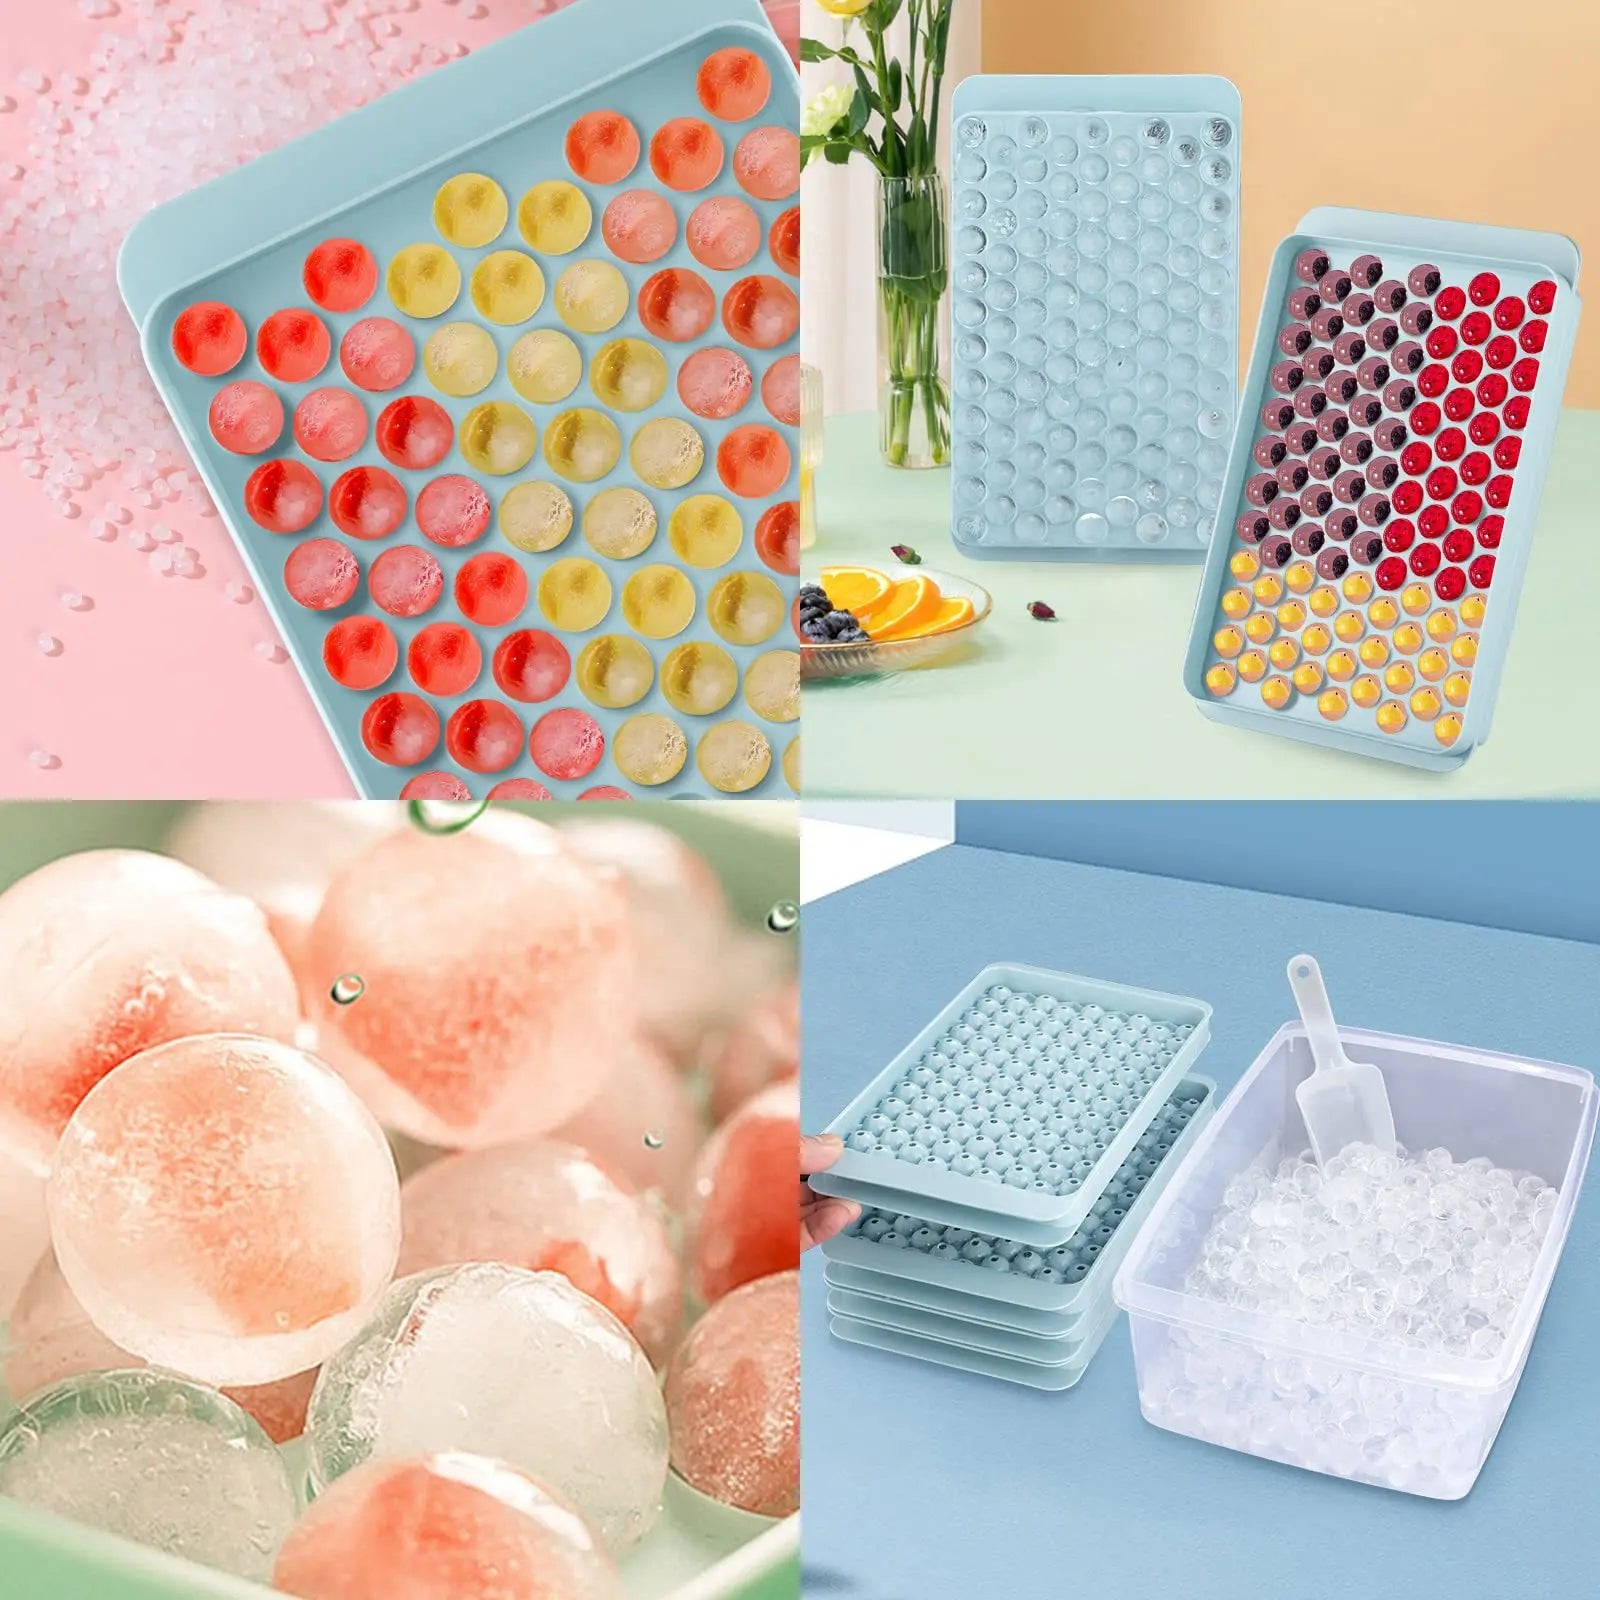 Mini Ice Cube Tray 104 Holes Round Ice Ball Molds with Lid Silicone Ice Cube Maker for Whiskey BPA Free Reusable Kitchen Gadget